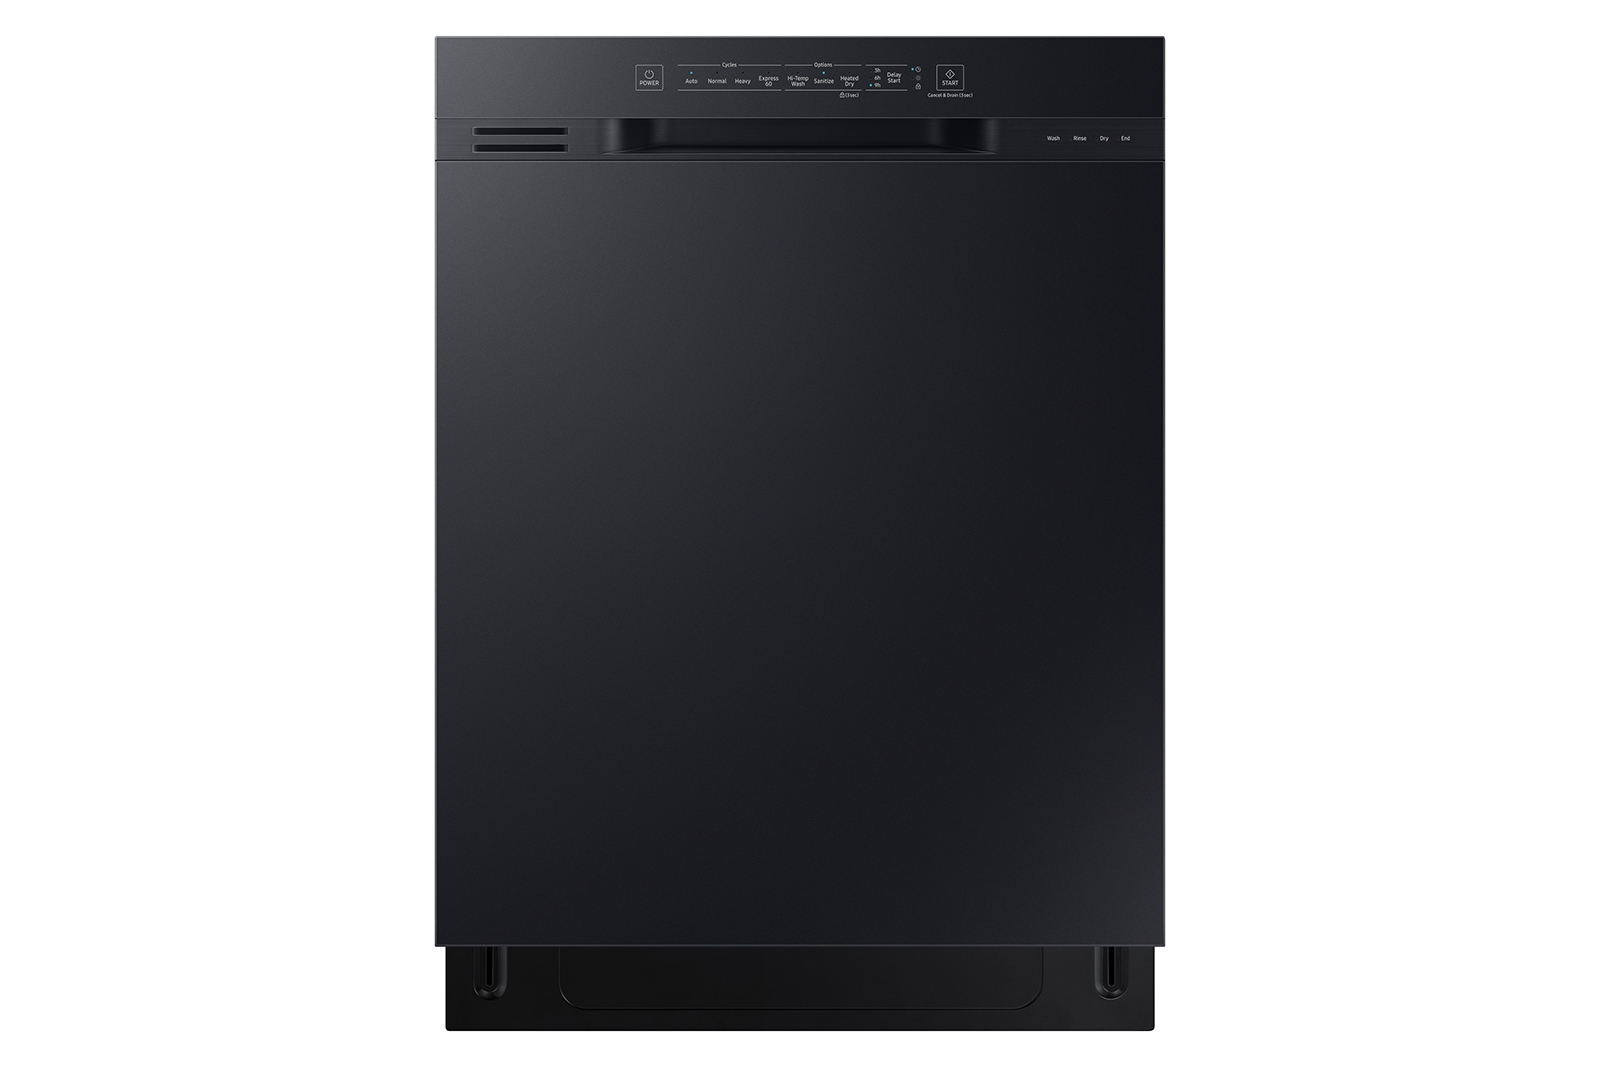 https://image-us.samsung.com/SamsungUS/home/home-appliances/dishwashers/rotary/pdp/dw80n3030ub/gallery/DW80N3030UB-AA_001_Front_Black.jpg?$related-products-jpg$